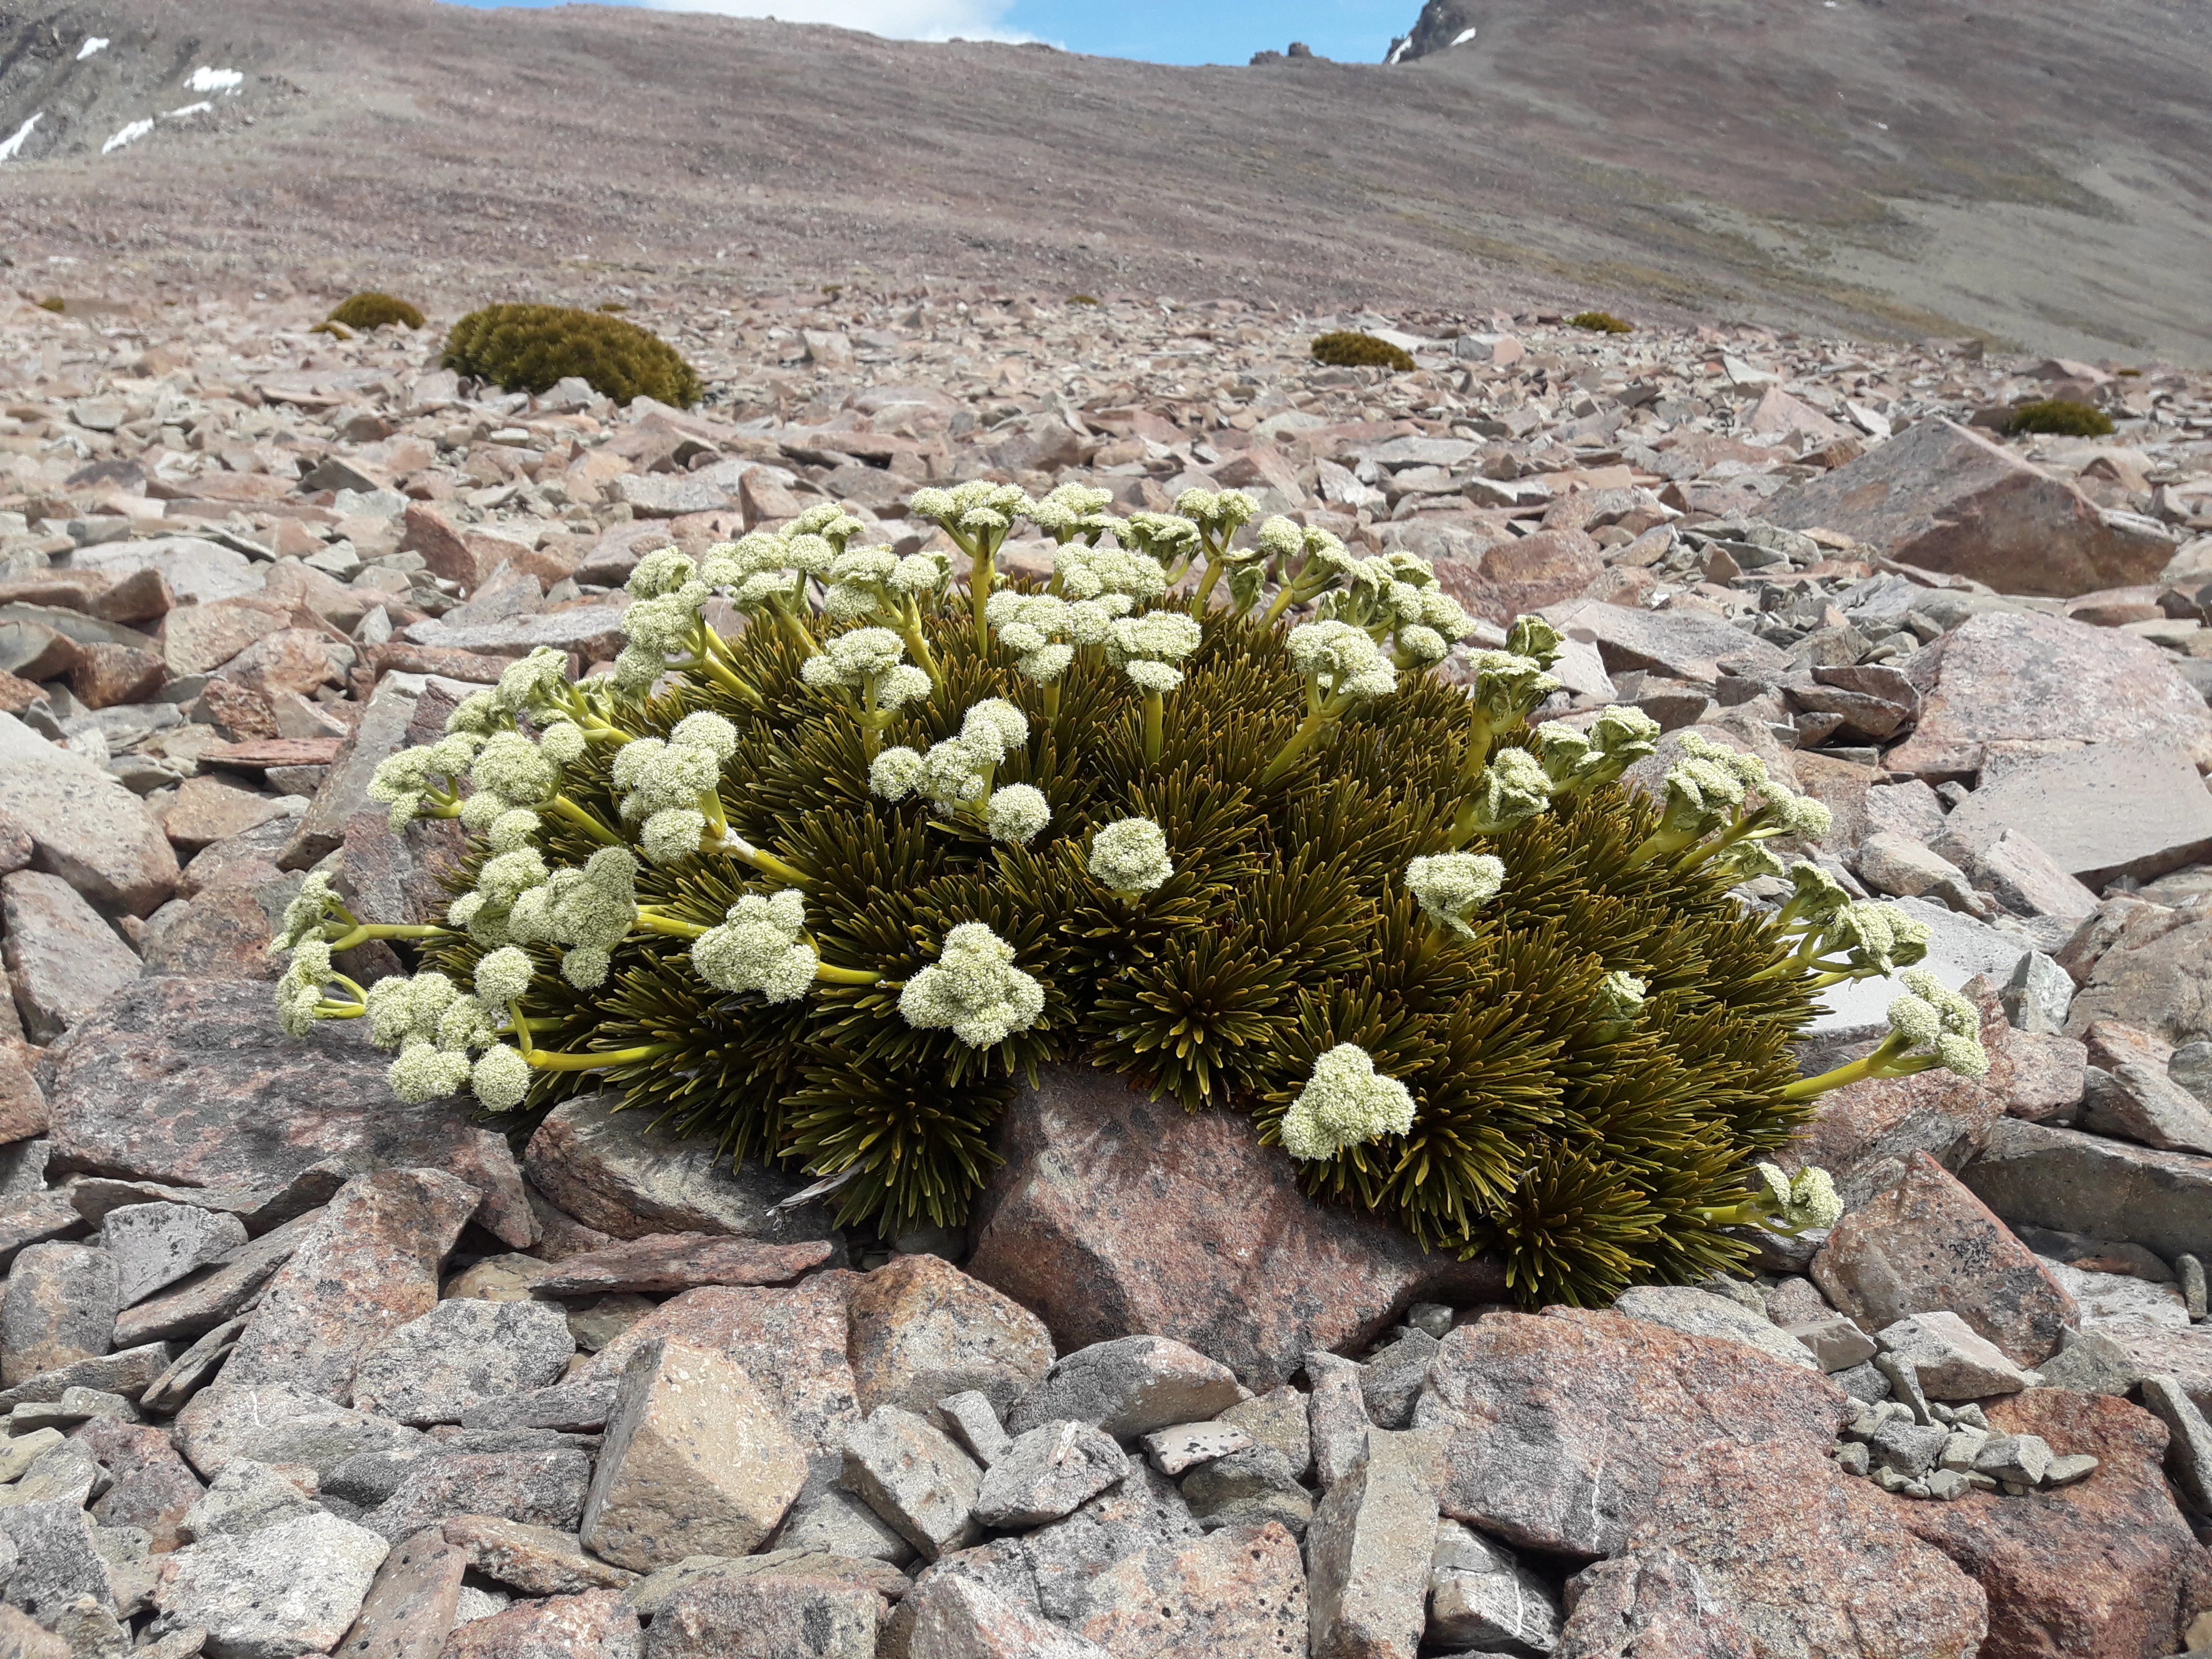 A spiky shrub on a rocky hillside. It has clumps of white flowers that look like cauliflowers.